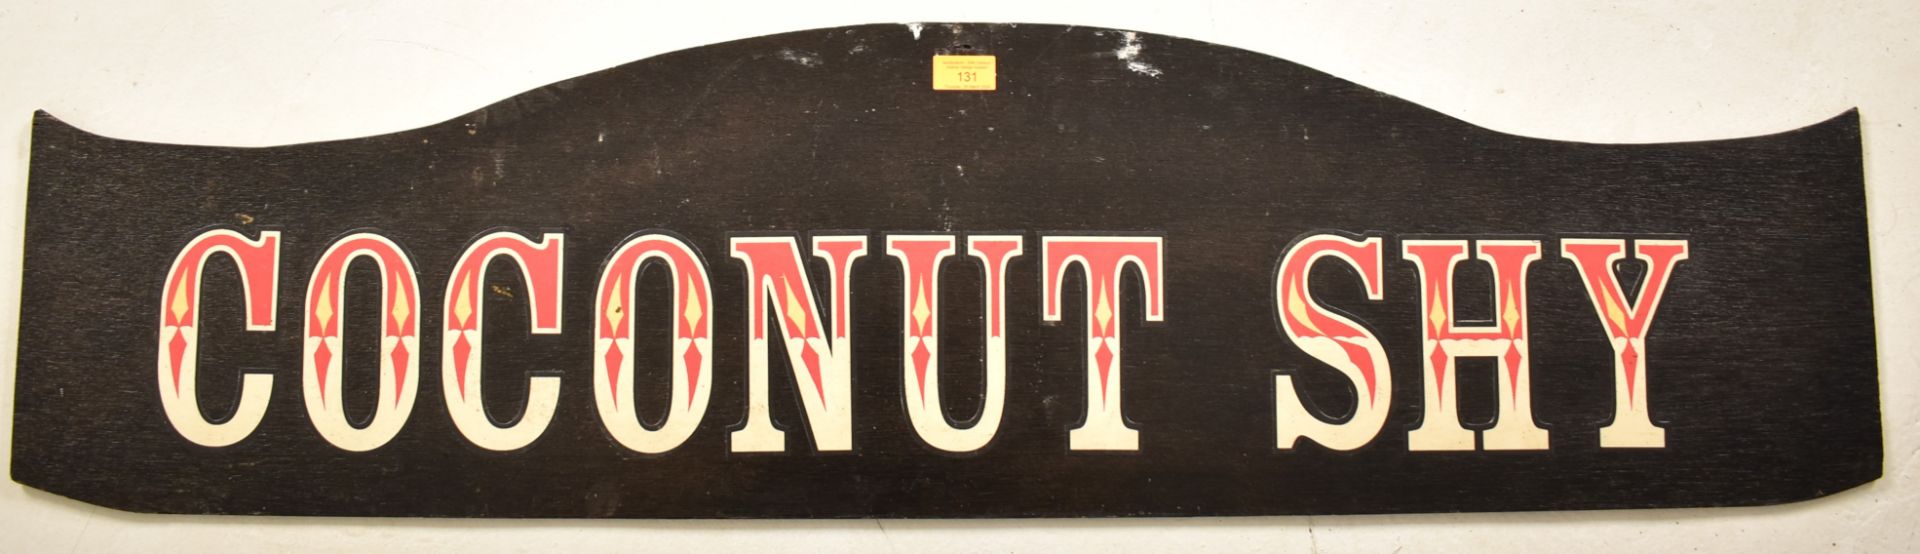 COCONUT SHY - 20TH CENTURY FAIRGROUND PAINTED SIGN